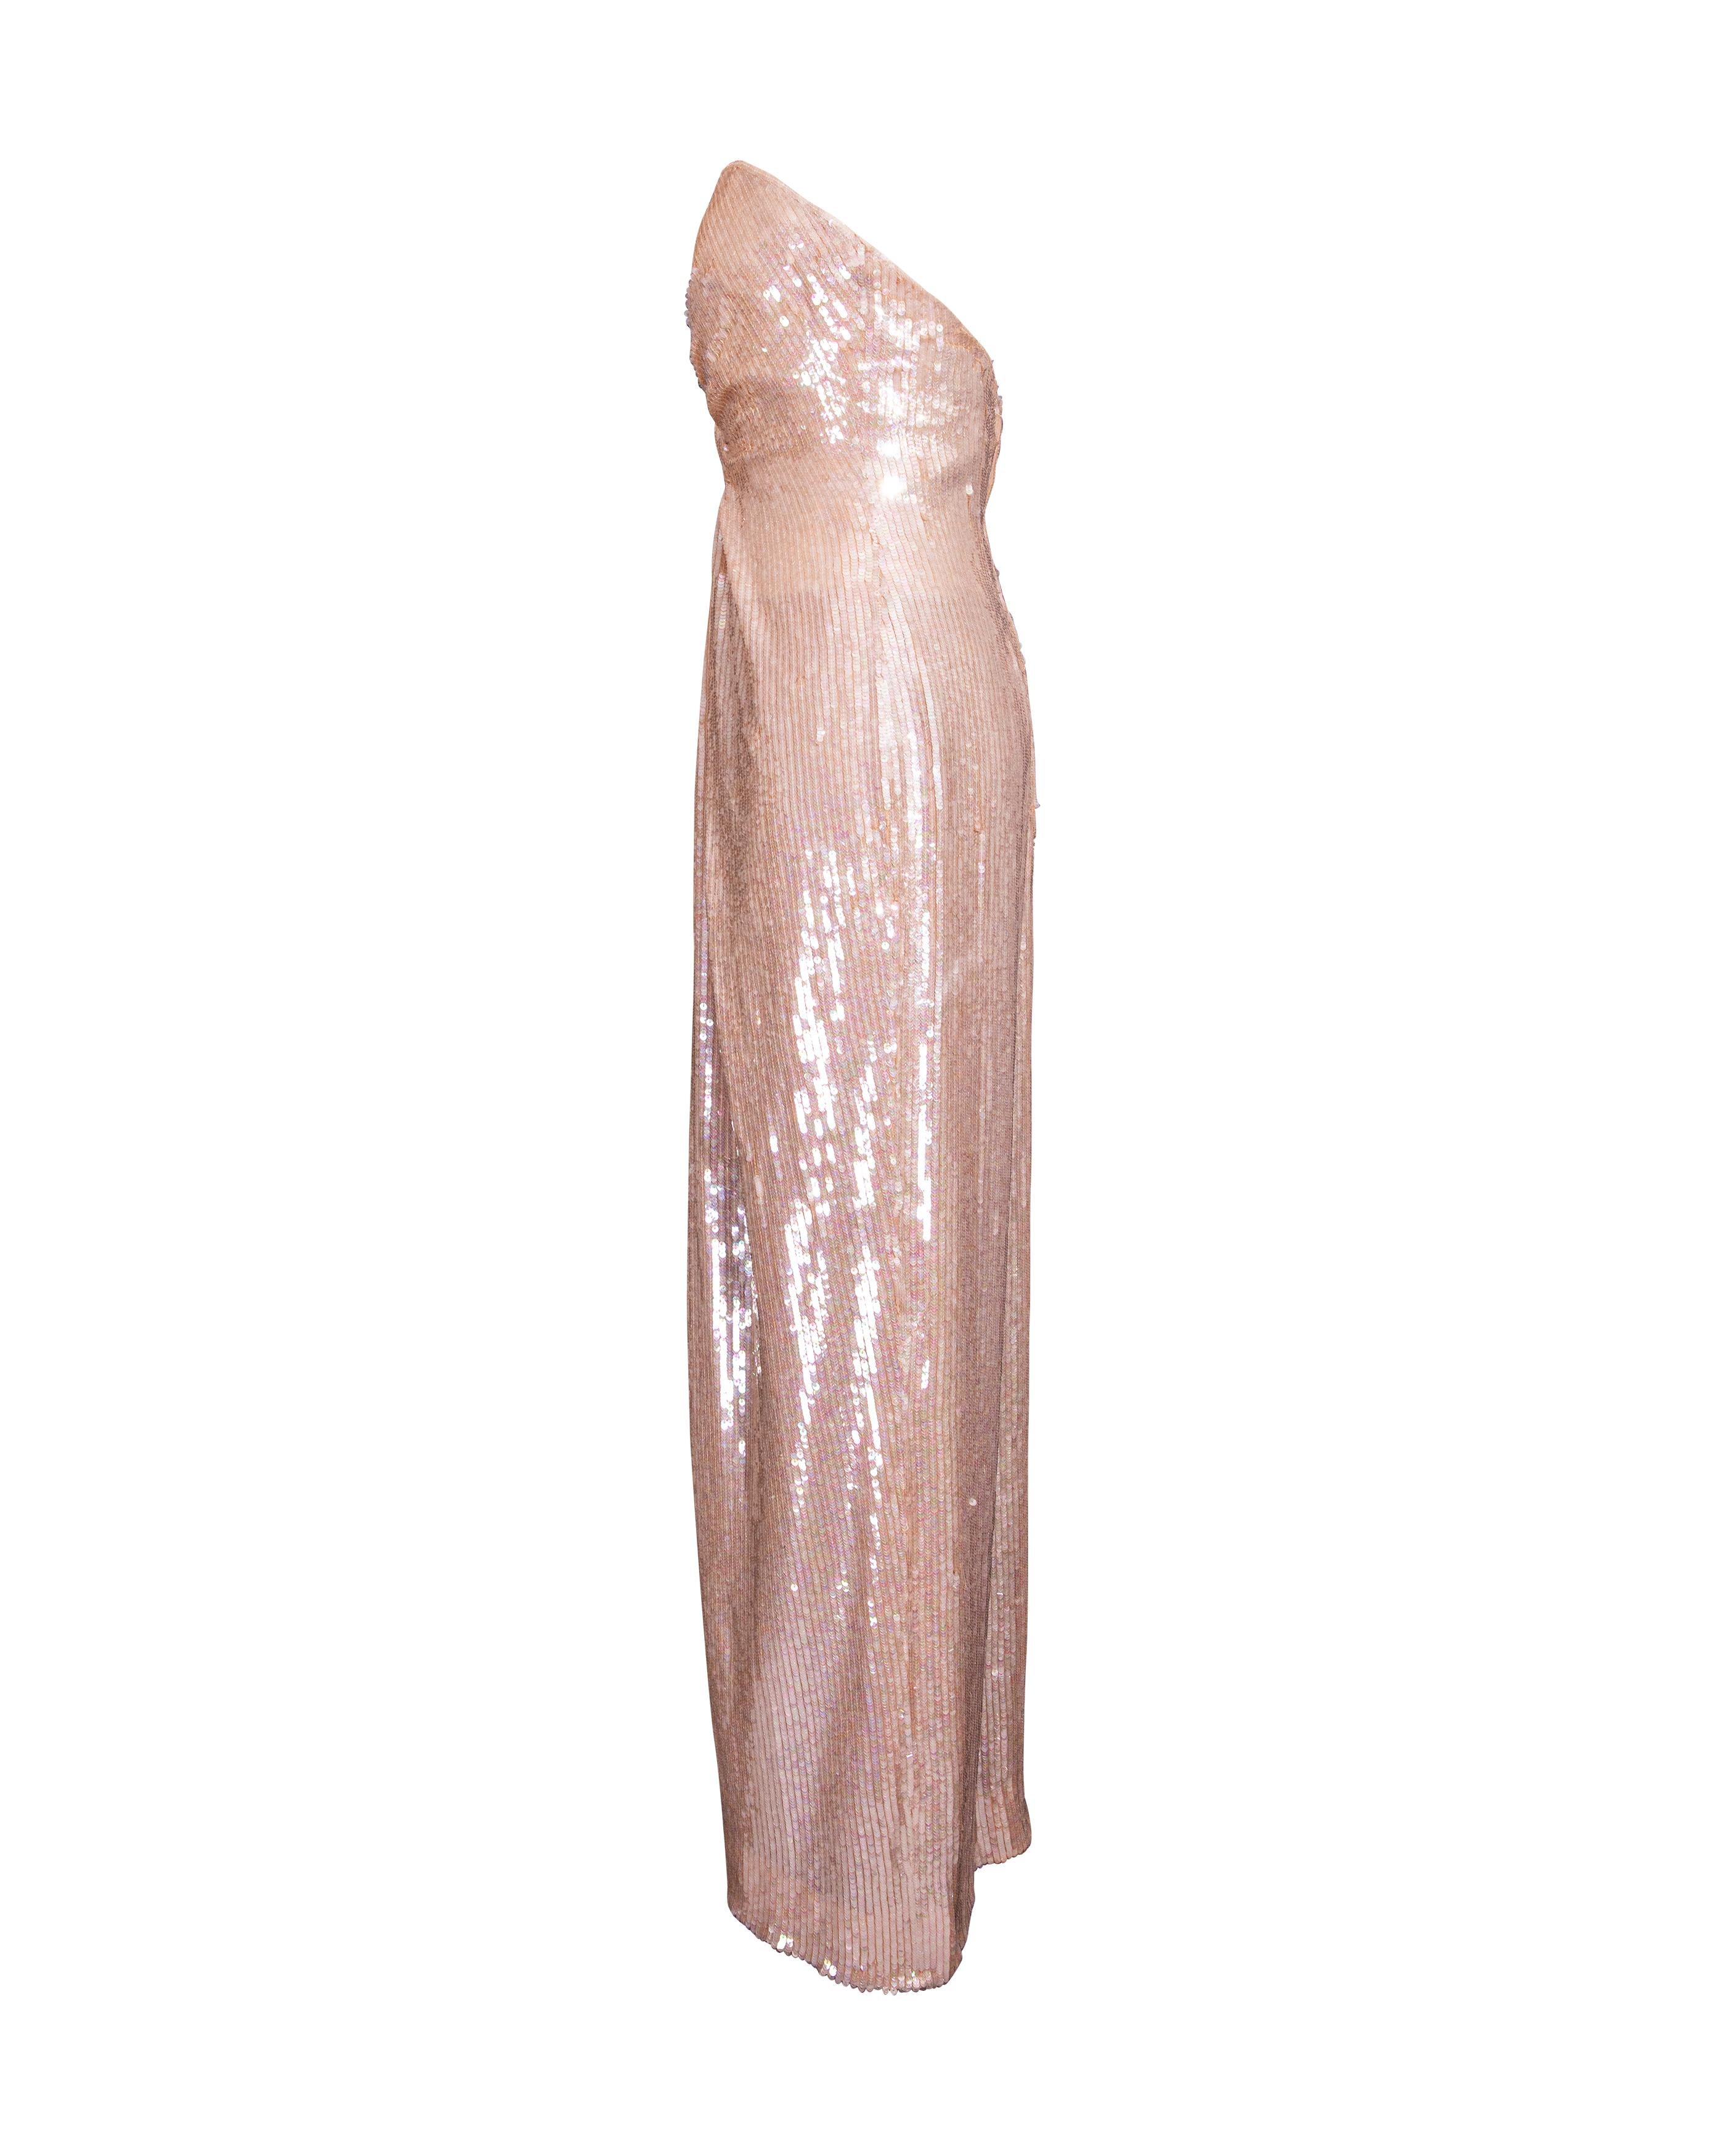 1980's John Anthony Peach Strapless Sequin Gown In Excellent Condition For Sale In North Hollywood, CA